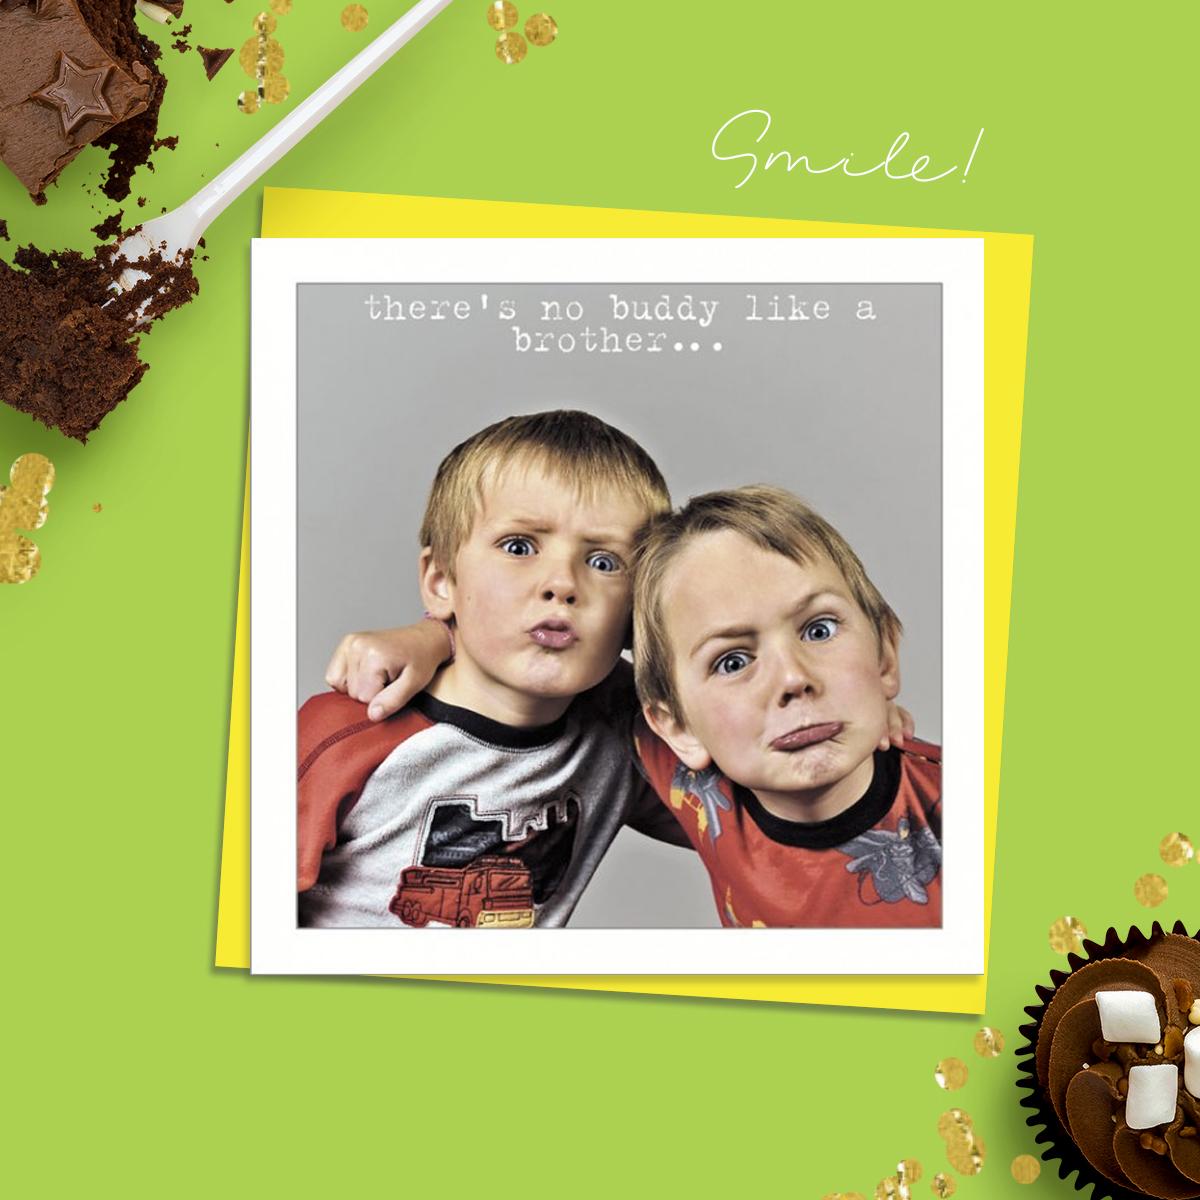 Beautiful Photographic Funny Card Showing Two Young Boys Pulling Faces. Caption: There's No Buddy Like A Brother...' Blank Inside For Your Own Message And Complete With Neon Yellow Envelope